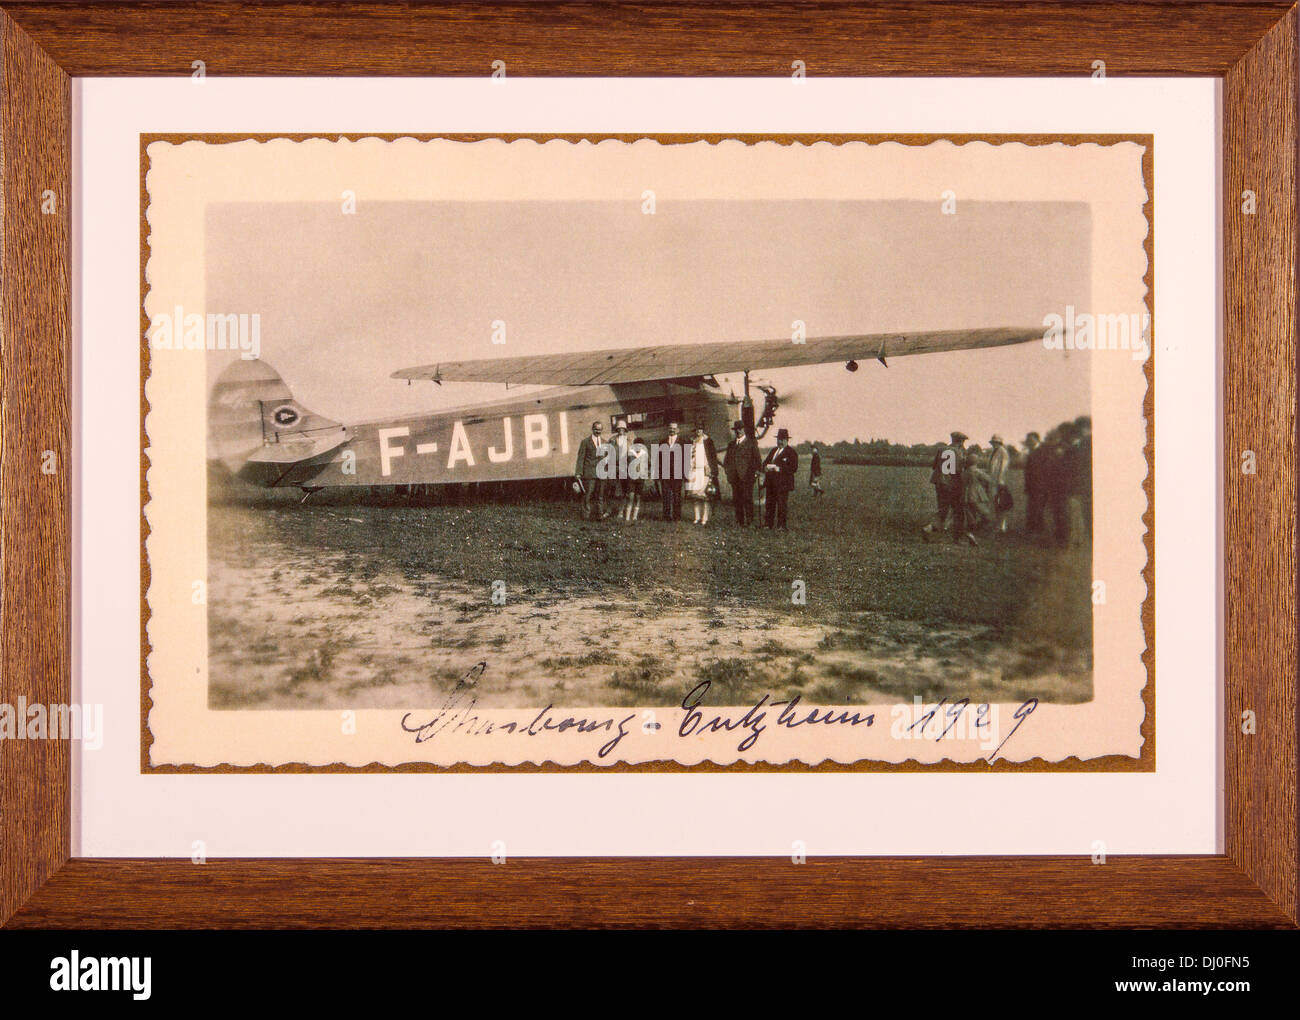 Framed 1929 vintage picture of Strasbourg-Entzheim airport with retro Fokker airplane and passengers Alsace France Europe Stock Photo